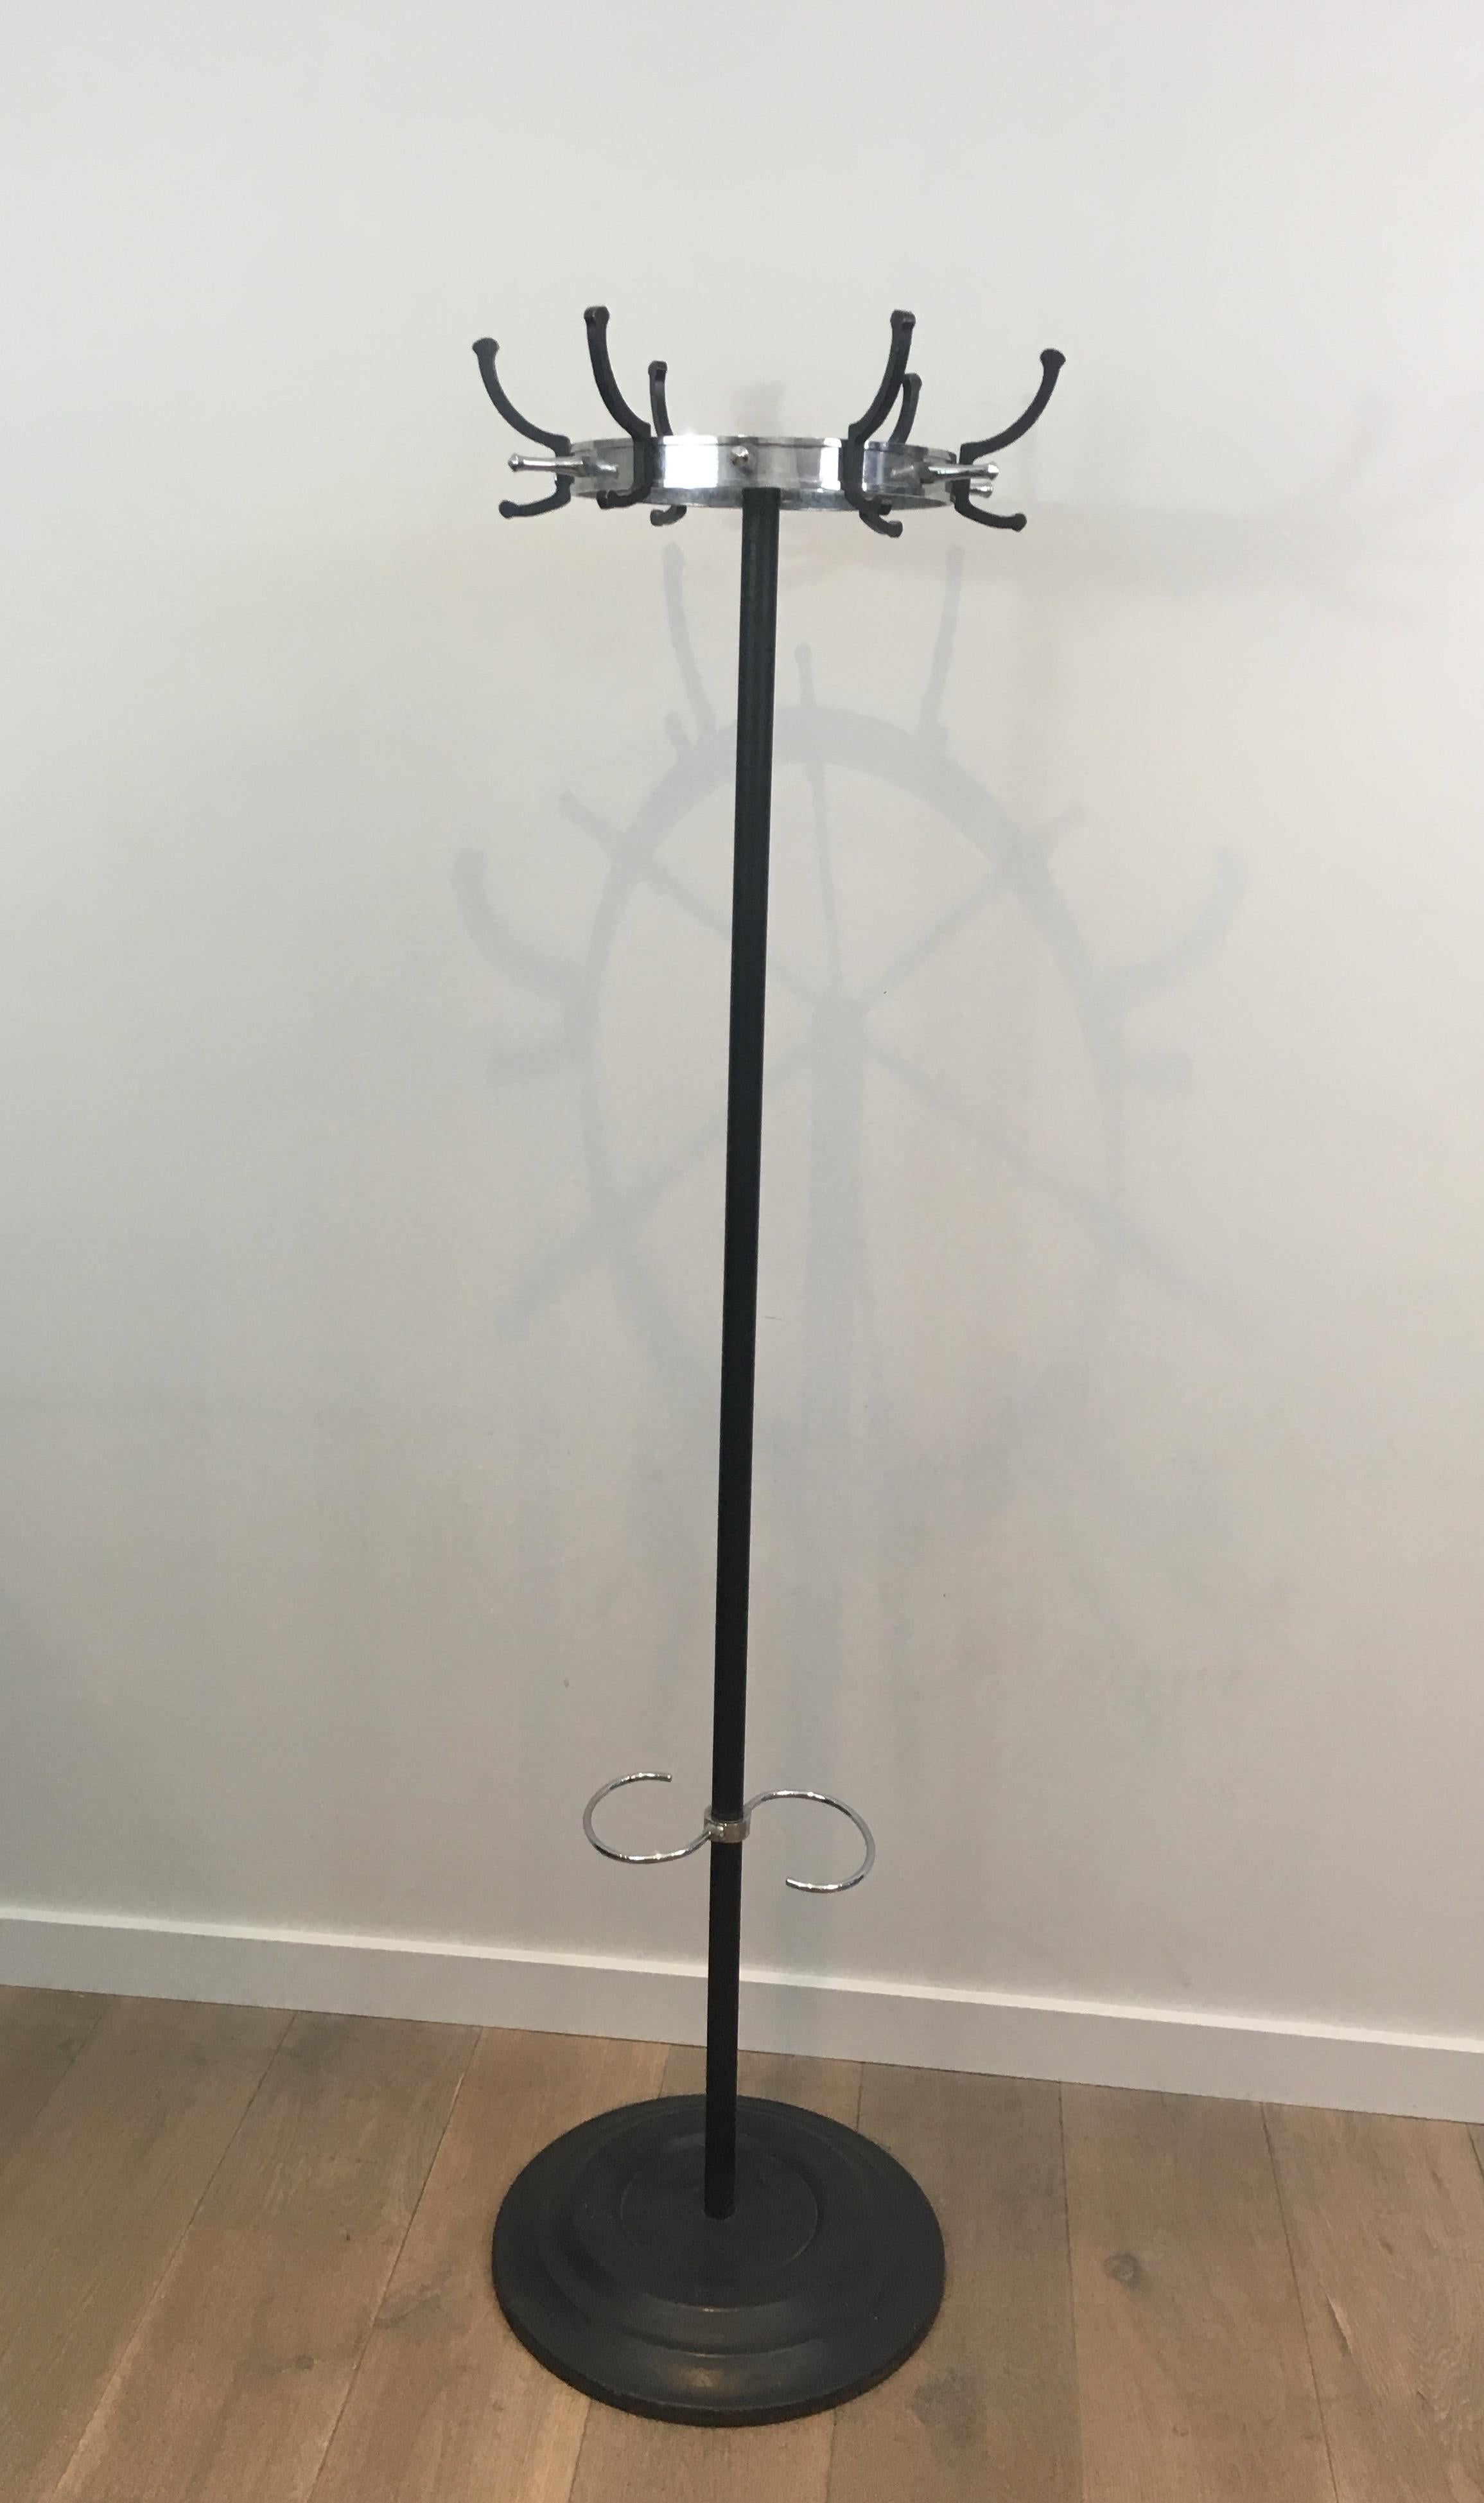 This nice standing coat rack is made of black lacquered metal and chrome. This is a model by famous French designer Jacques Adnet, made circa 1950.